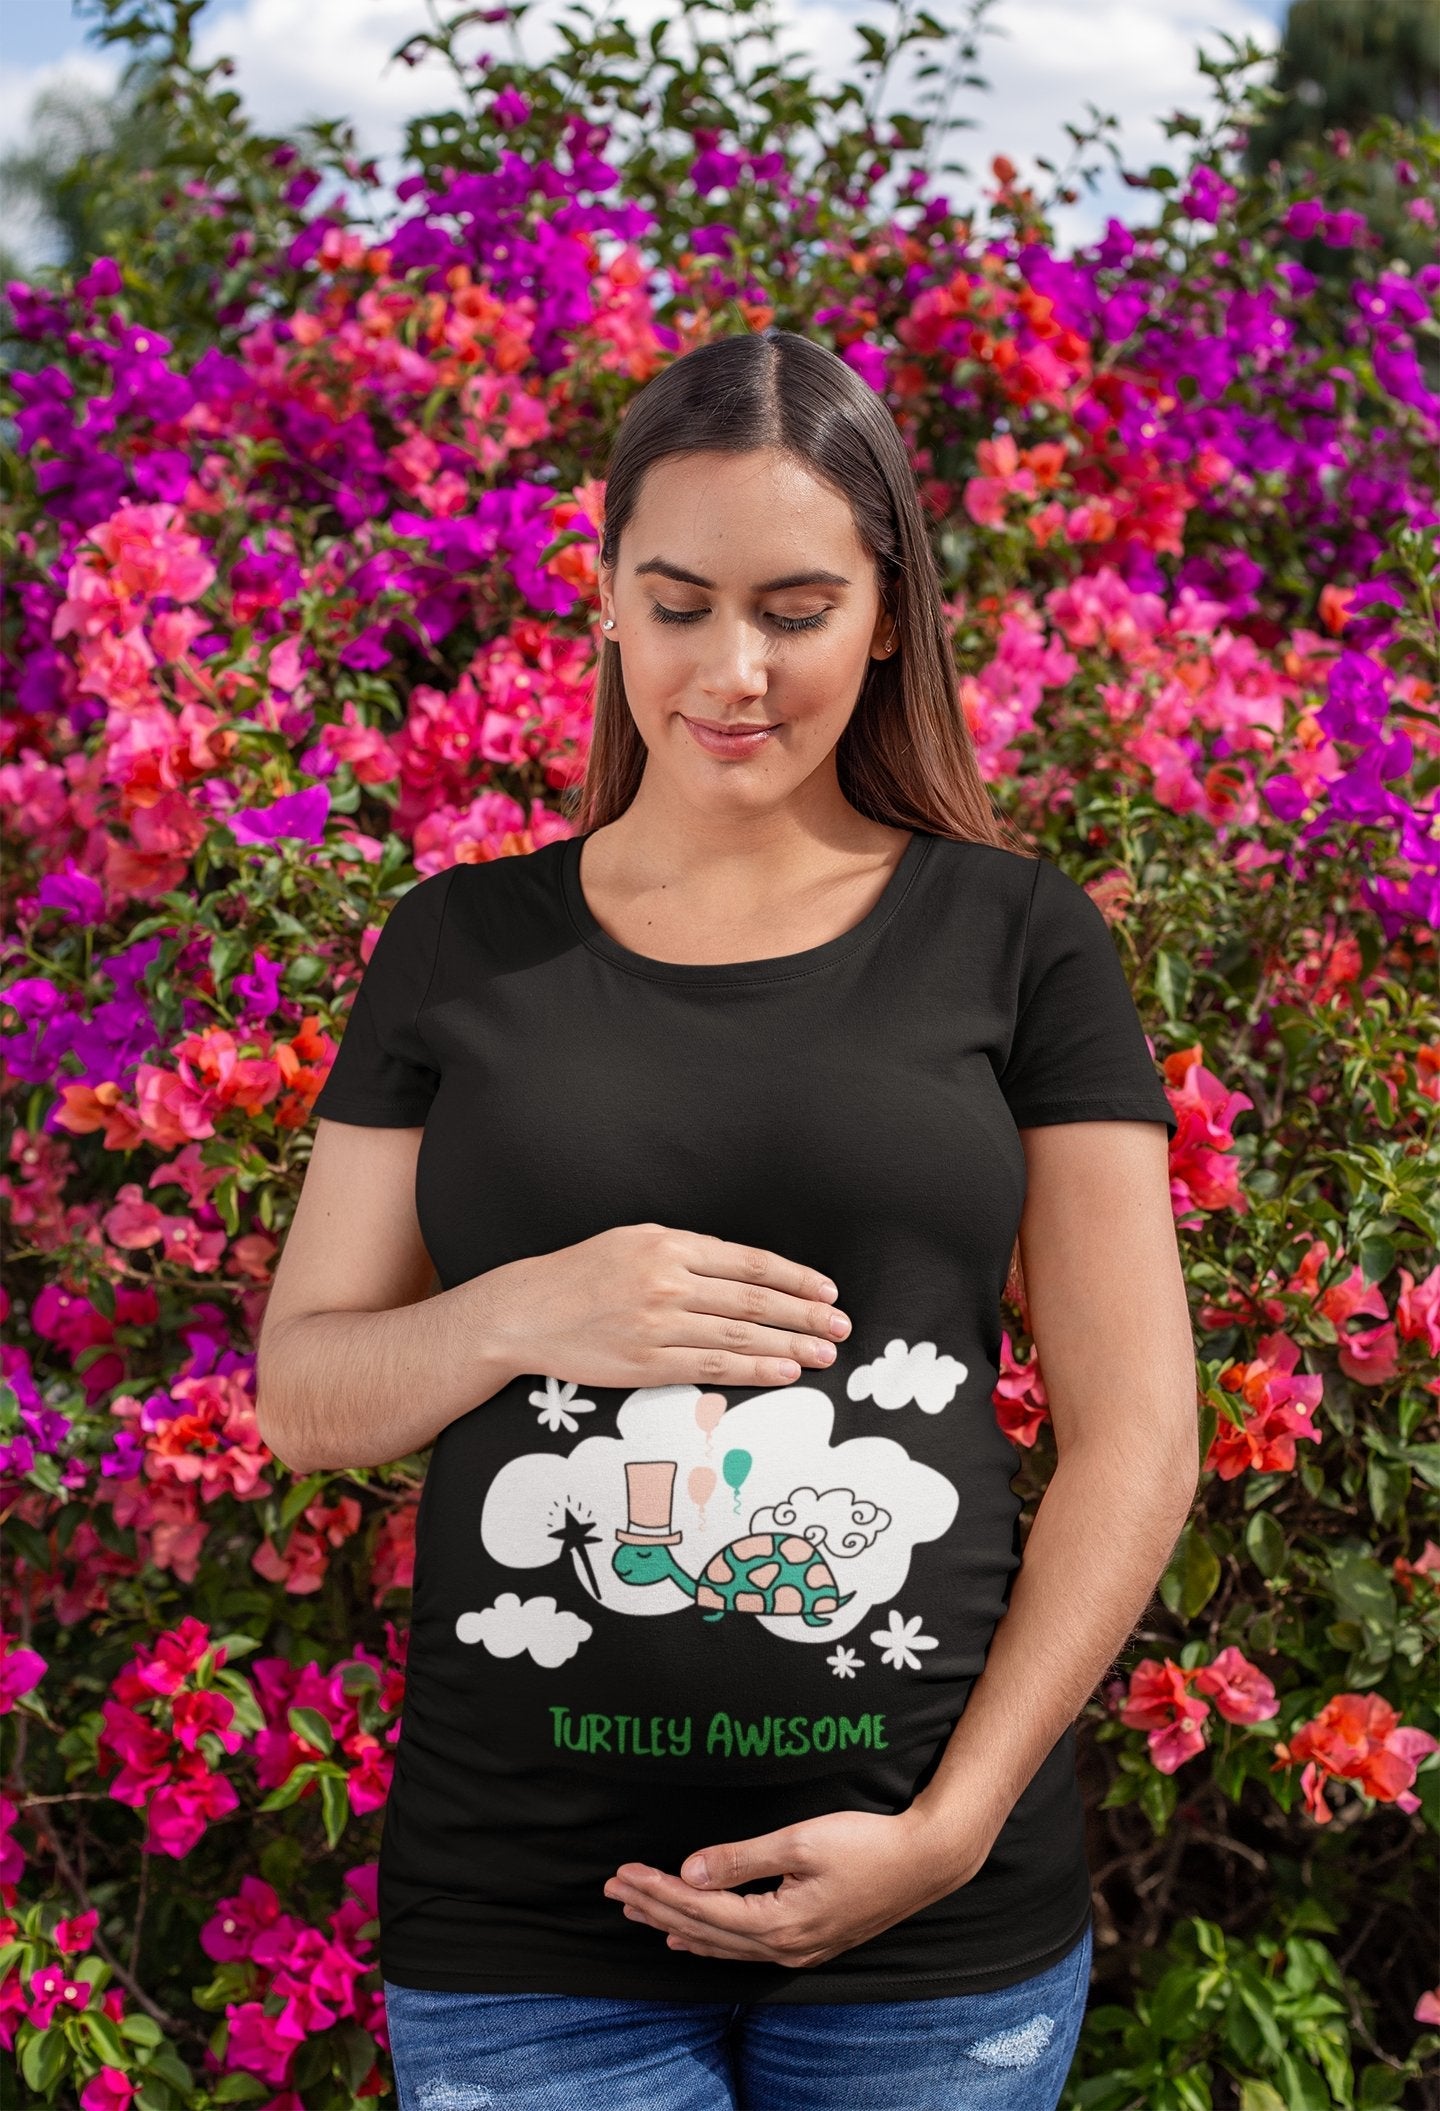 thelegalgang,Turtley Awesome Maternity T shirt,WOMEN.